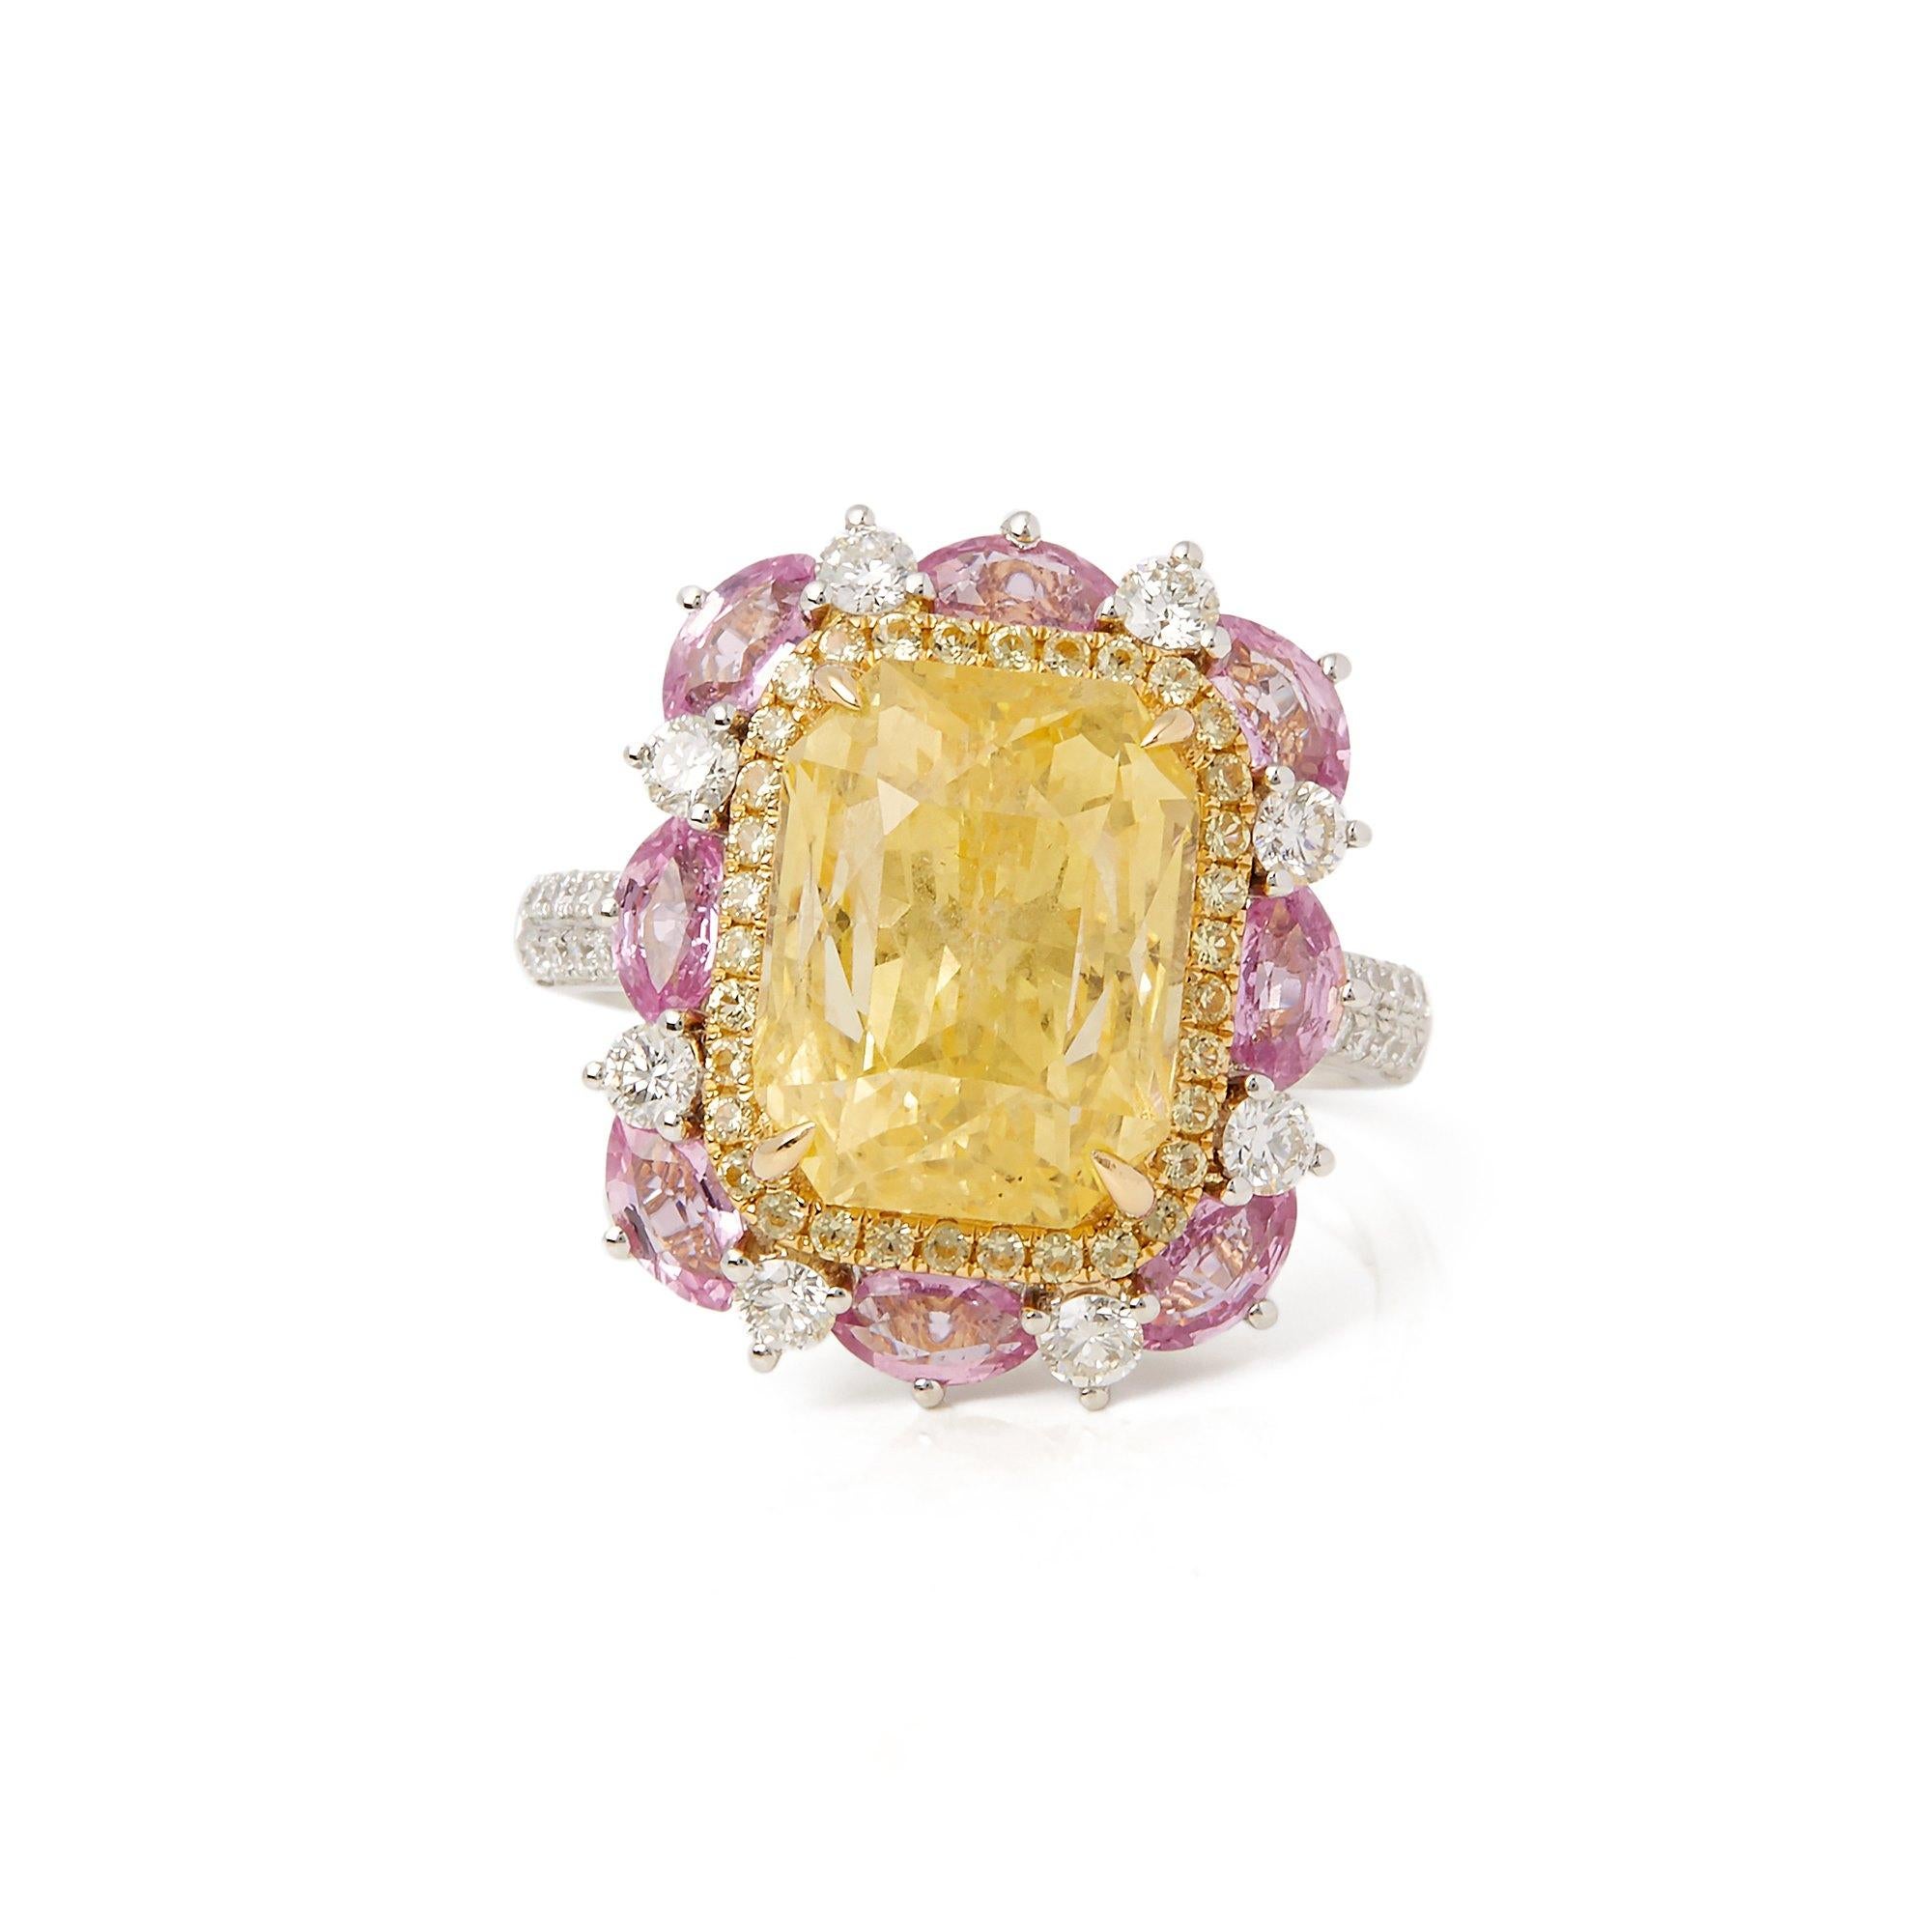 This ring designed by David Jerome is from his private collection and features one cushion cut yellow Sapphire totalling 10.38cts set with round brilliant cut Diamonds and pink Sapphires totalling 2.67cts. Mounted in an 18k white gold setting.